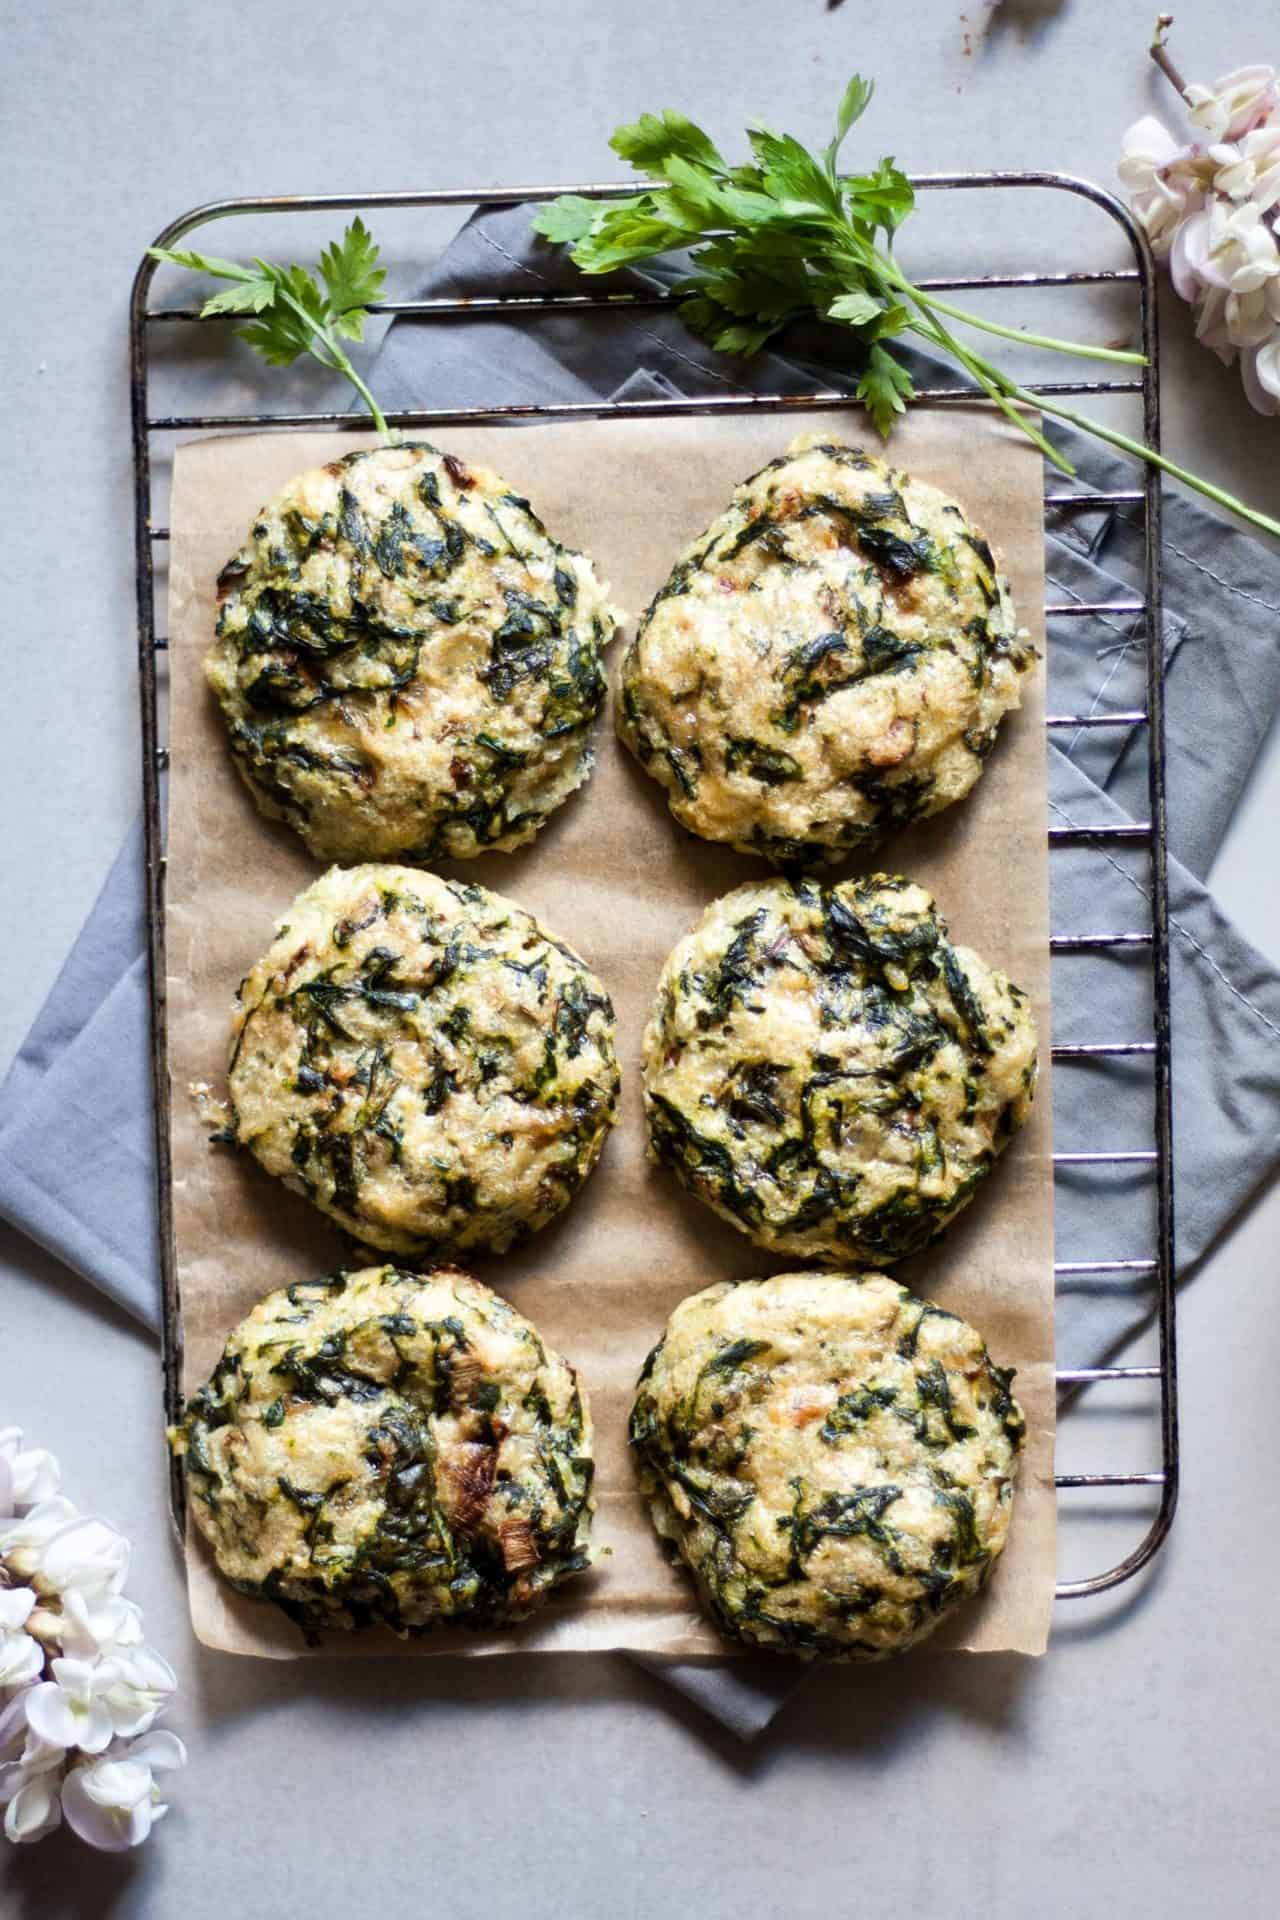 This Low FODMAP Spinach and Rice Patties are flavorful, light, filling and so so yum. They are gluten-free, nut-free and lactose-free.